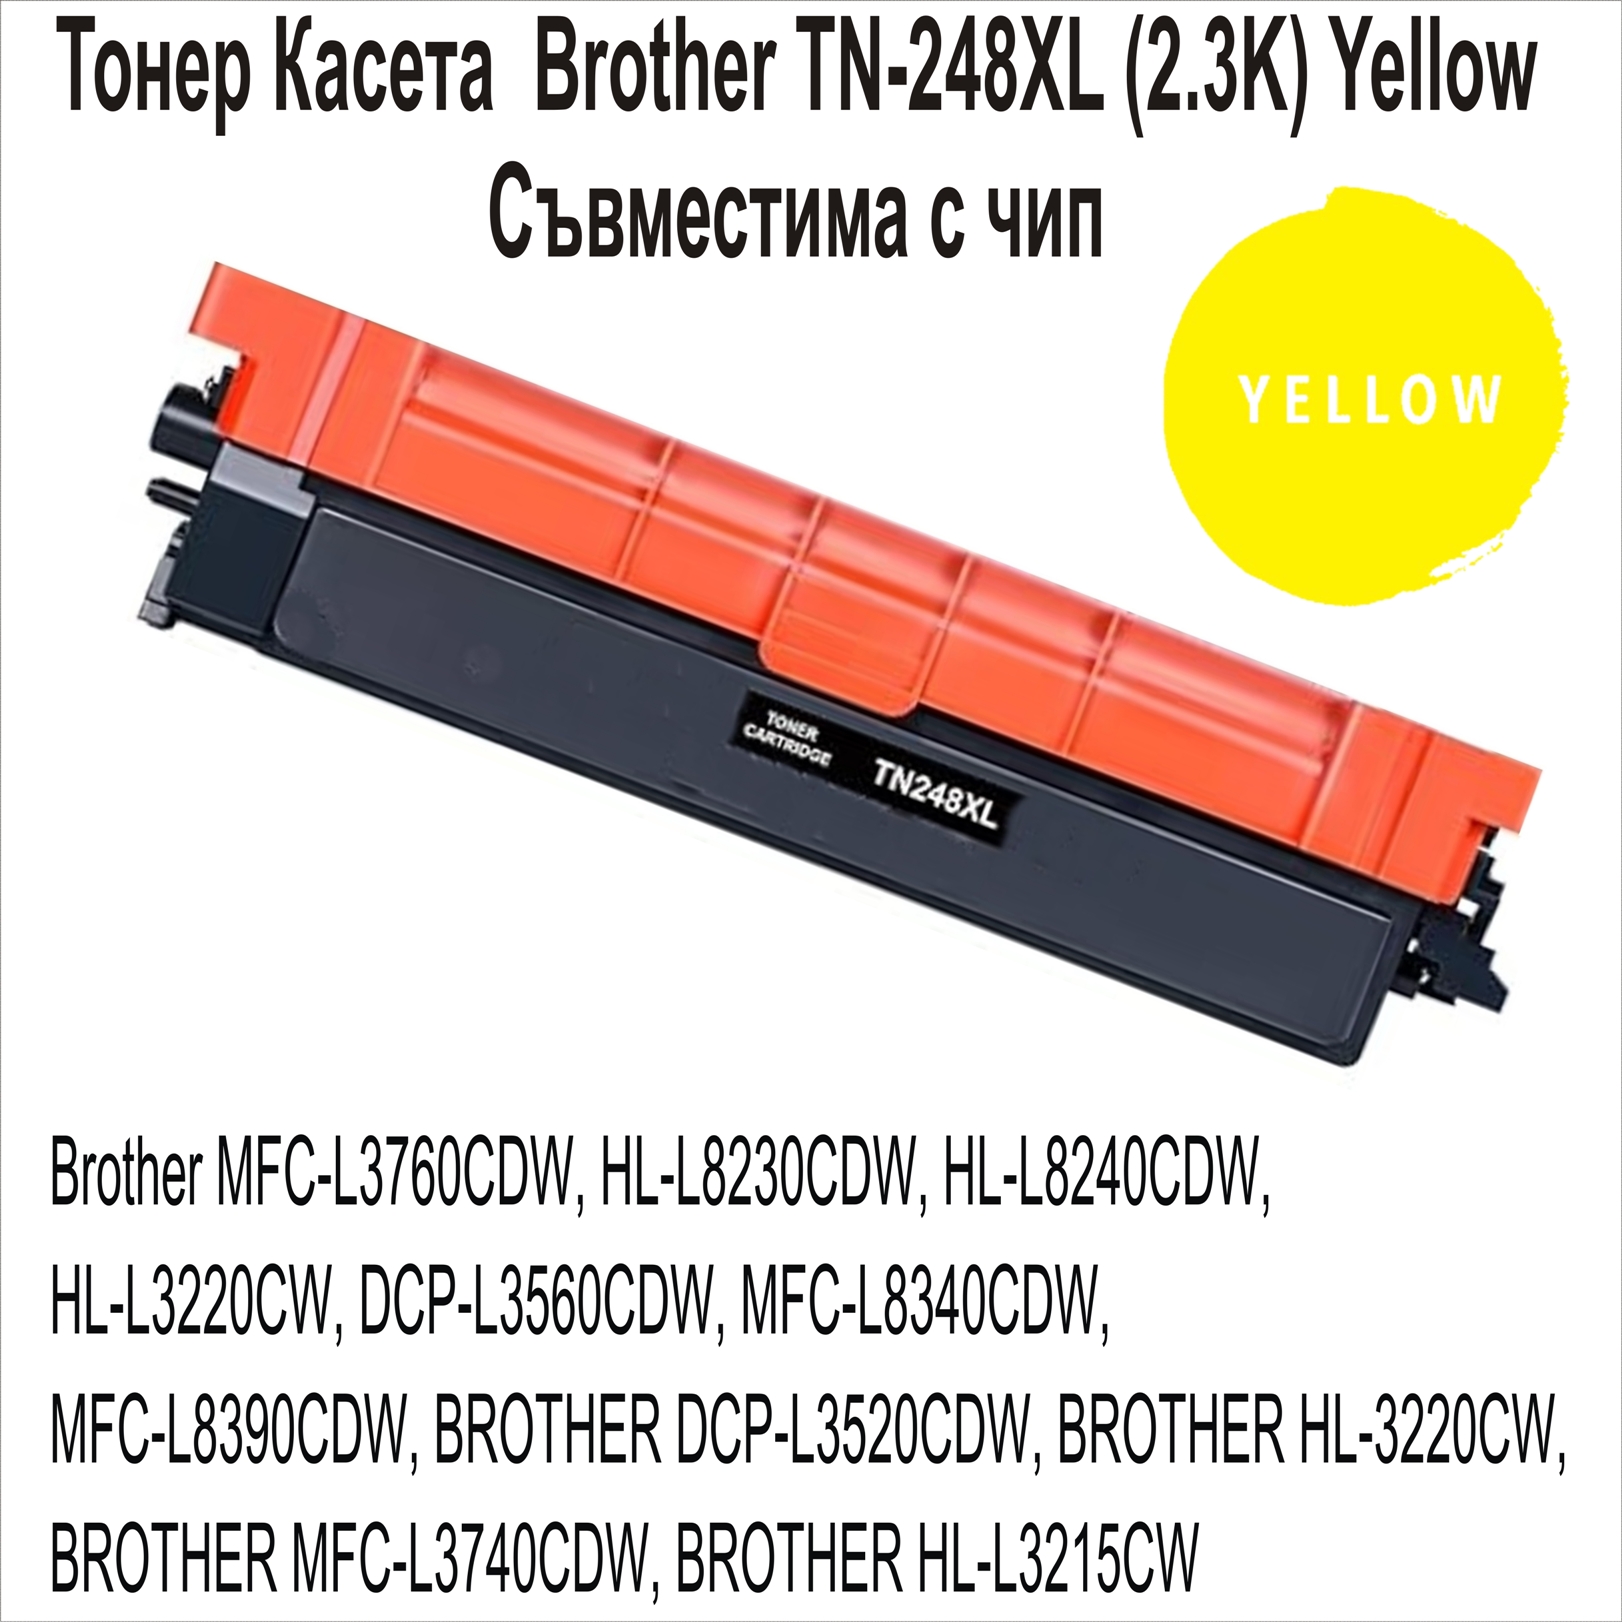 Brother TN-248XL (2.3K) Yellow Compatible